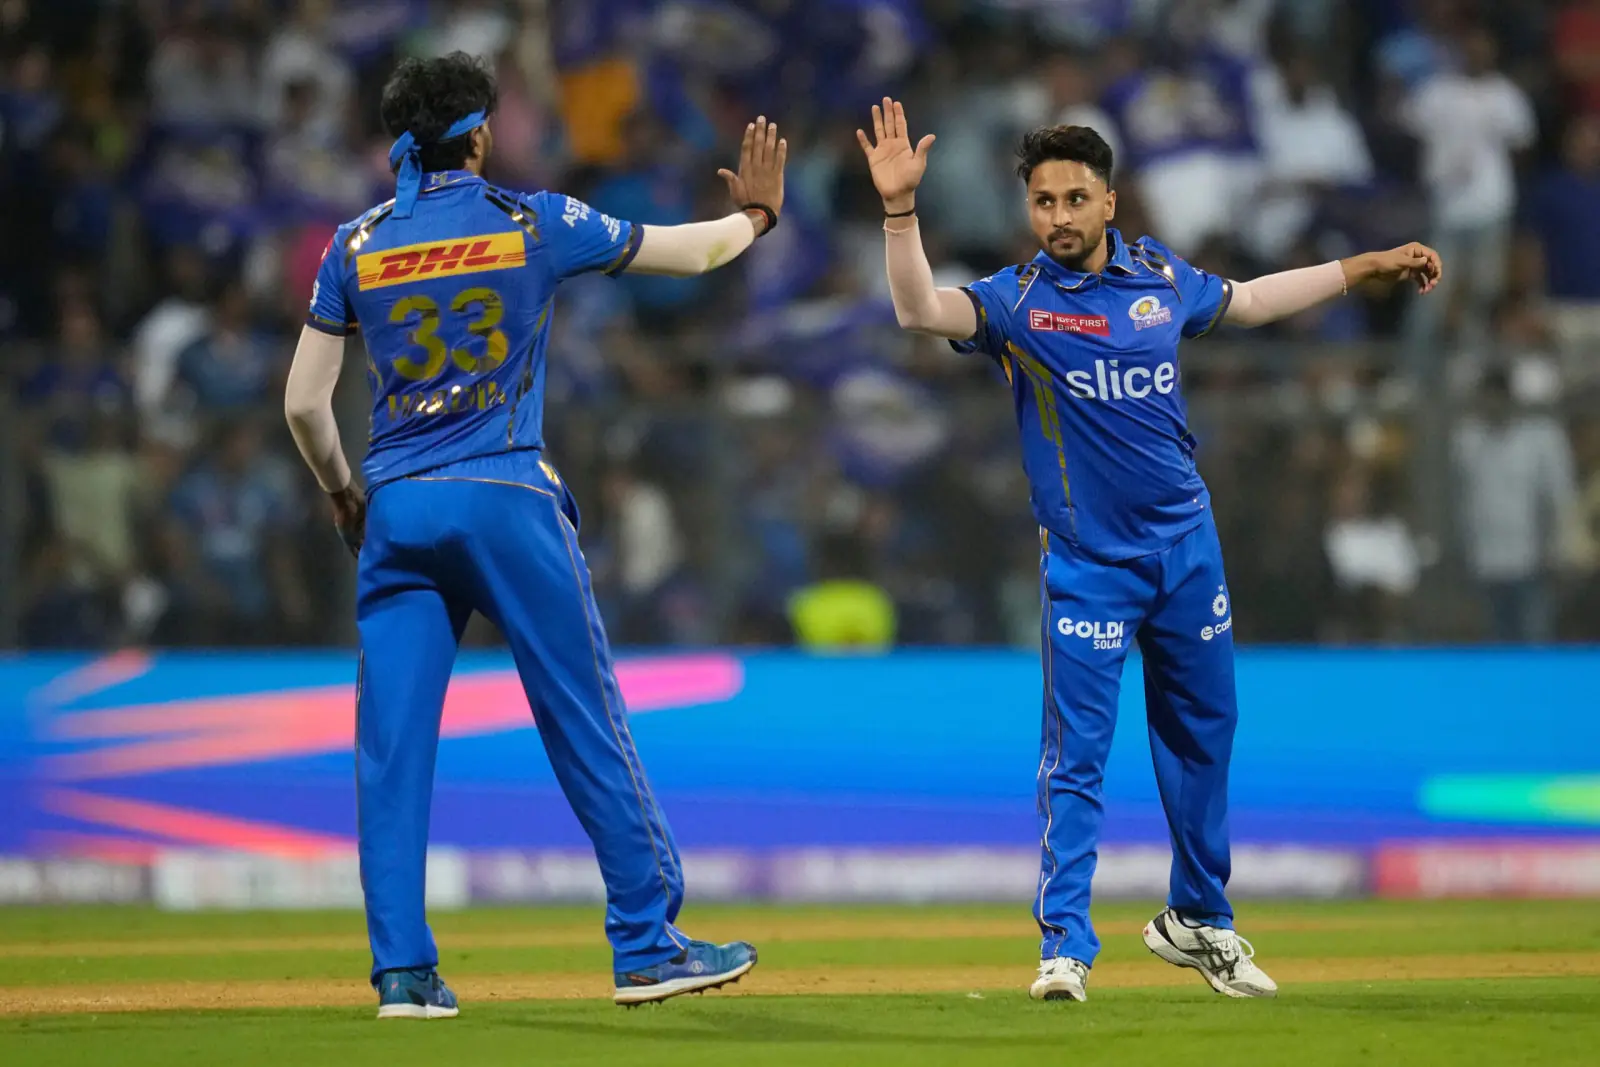 'Hardik Pandya did not look 100%', Adam Gilchrist raised questions on the fitness of Mumbai Indians